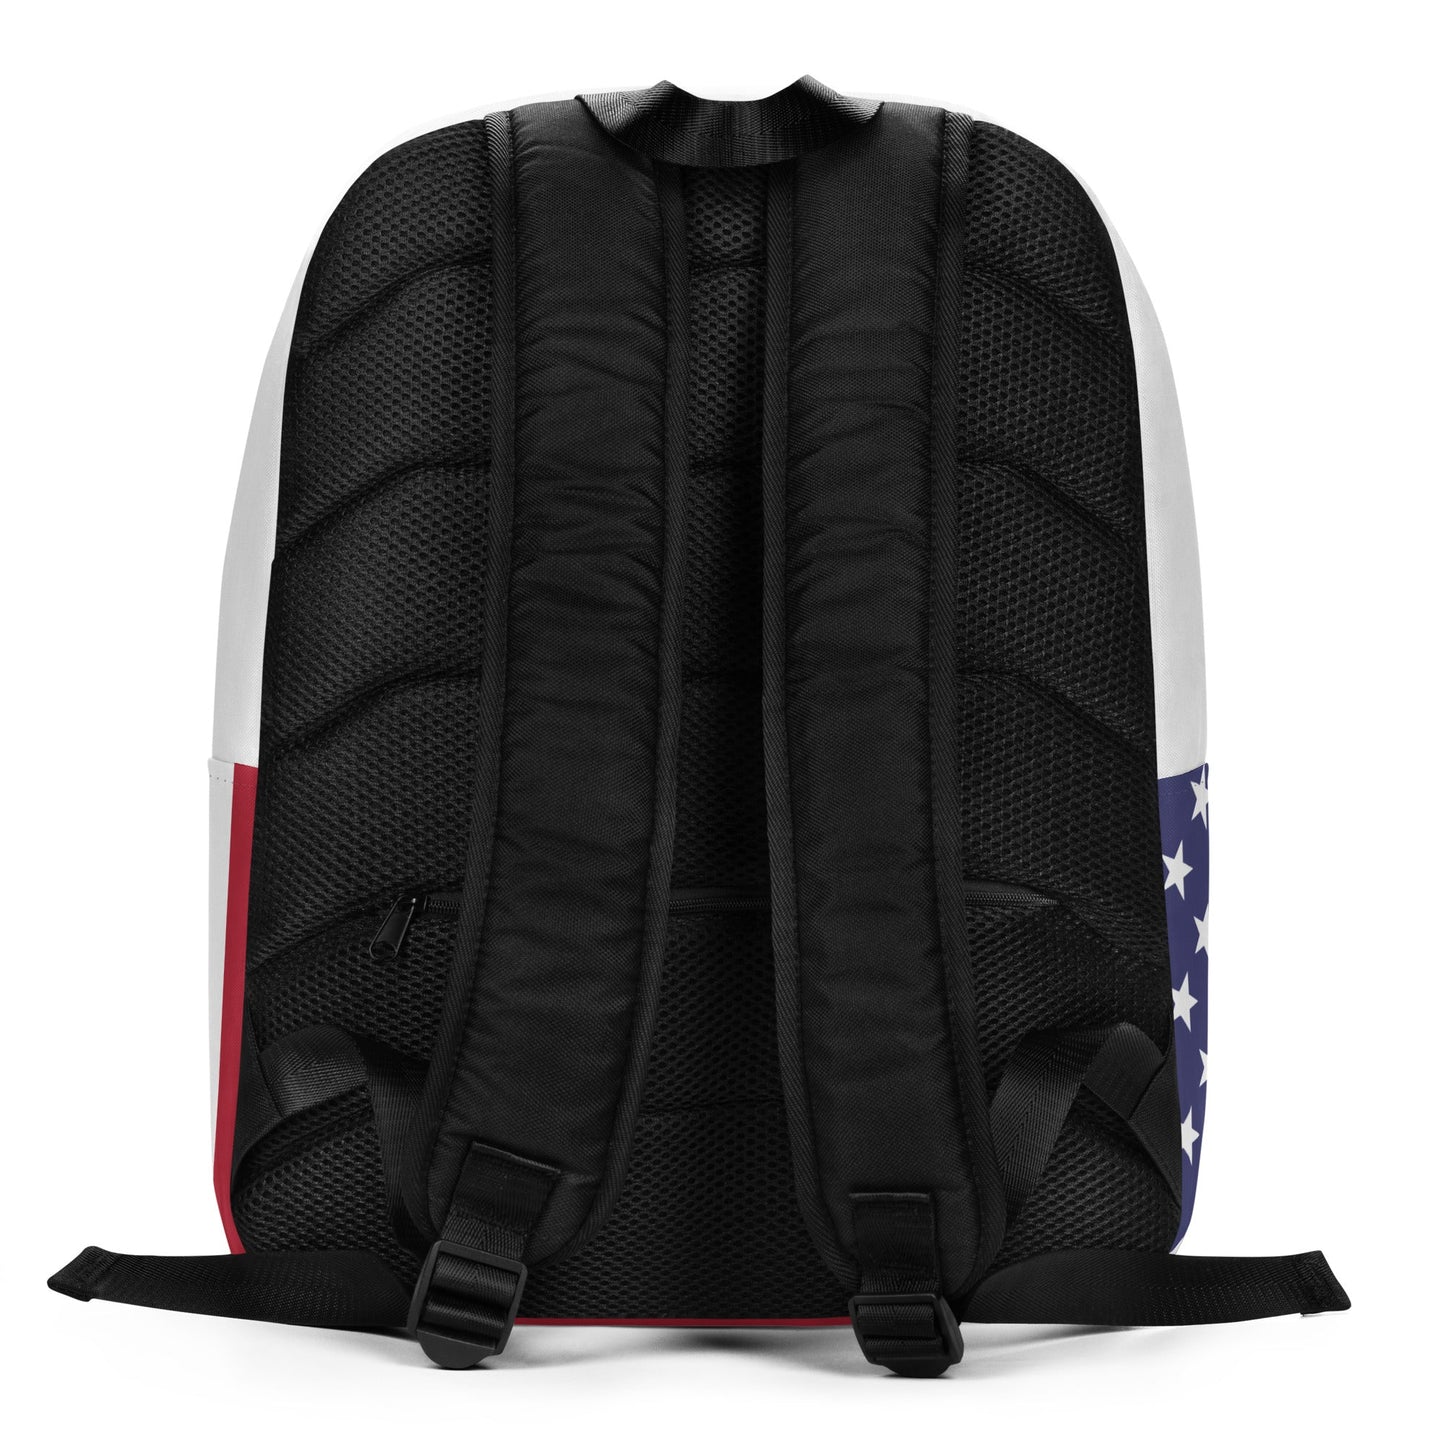 Kennedy Backpack - TEAM KENNEDY. All rights reserved